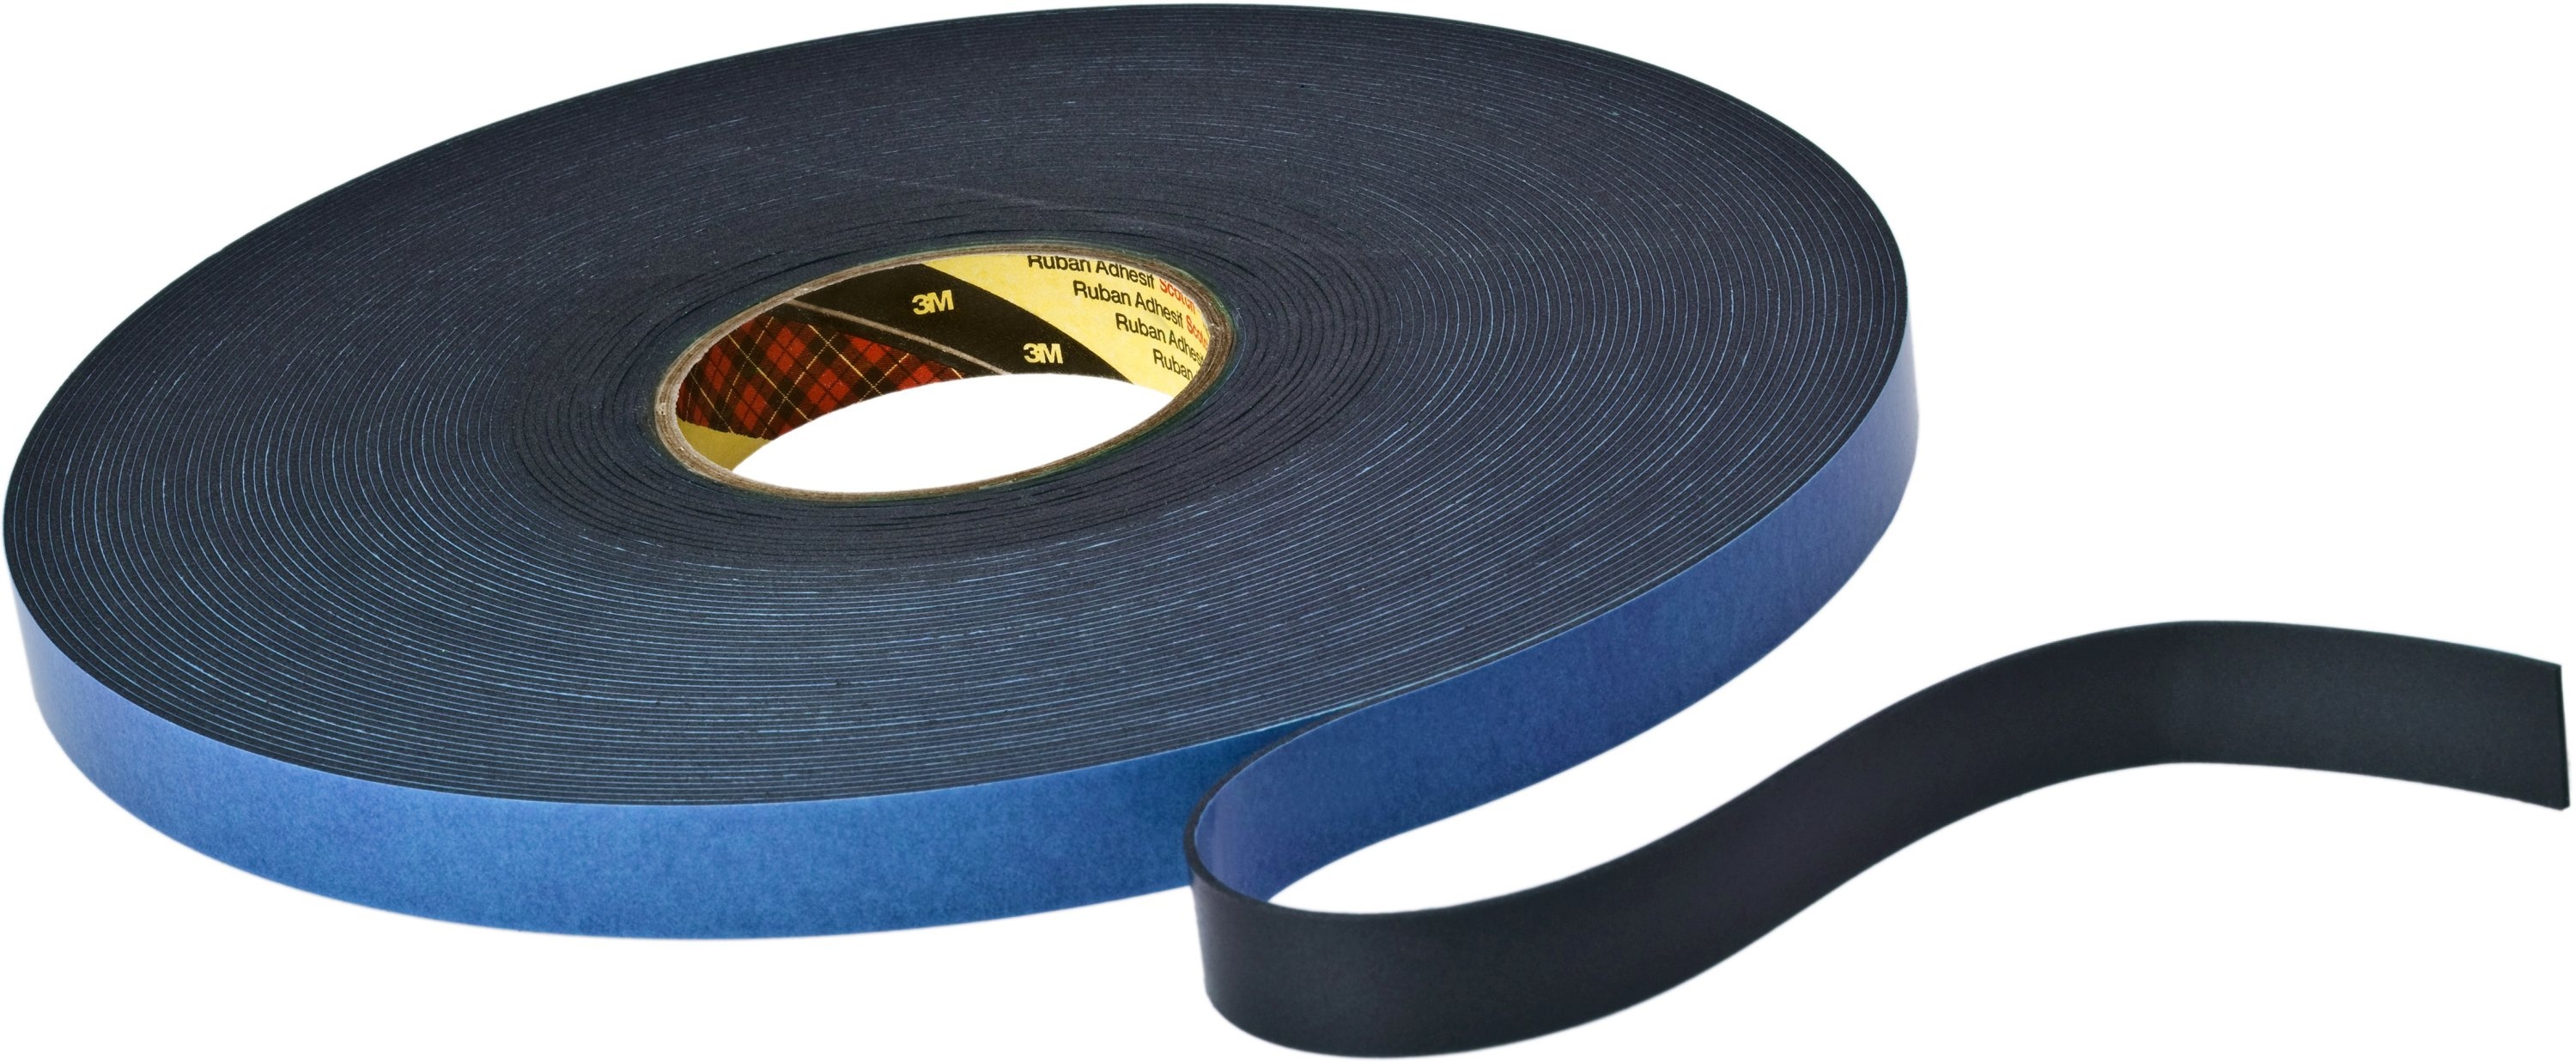 3M Double-sided PE foam tape with acrylic adhesive 9508B, black, 25 mm x 66 m, 0.8 mm